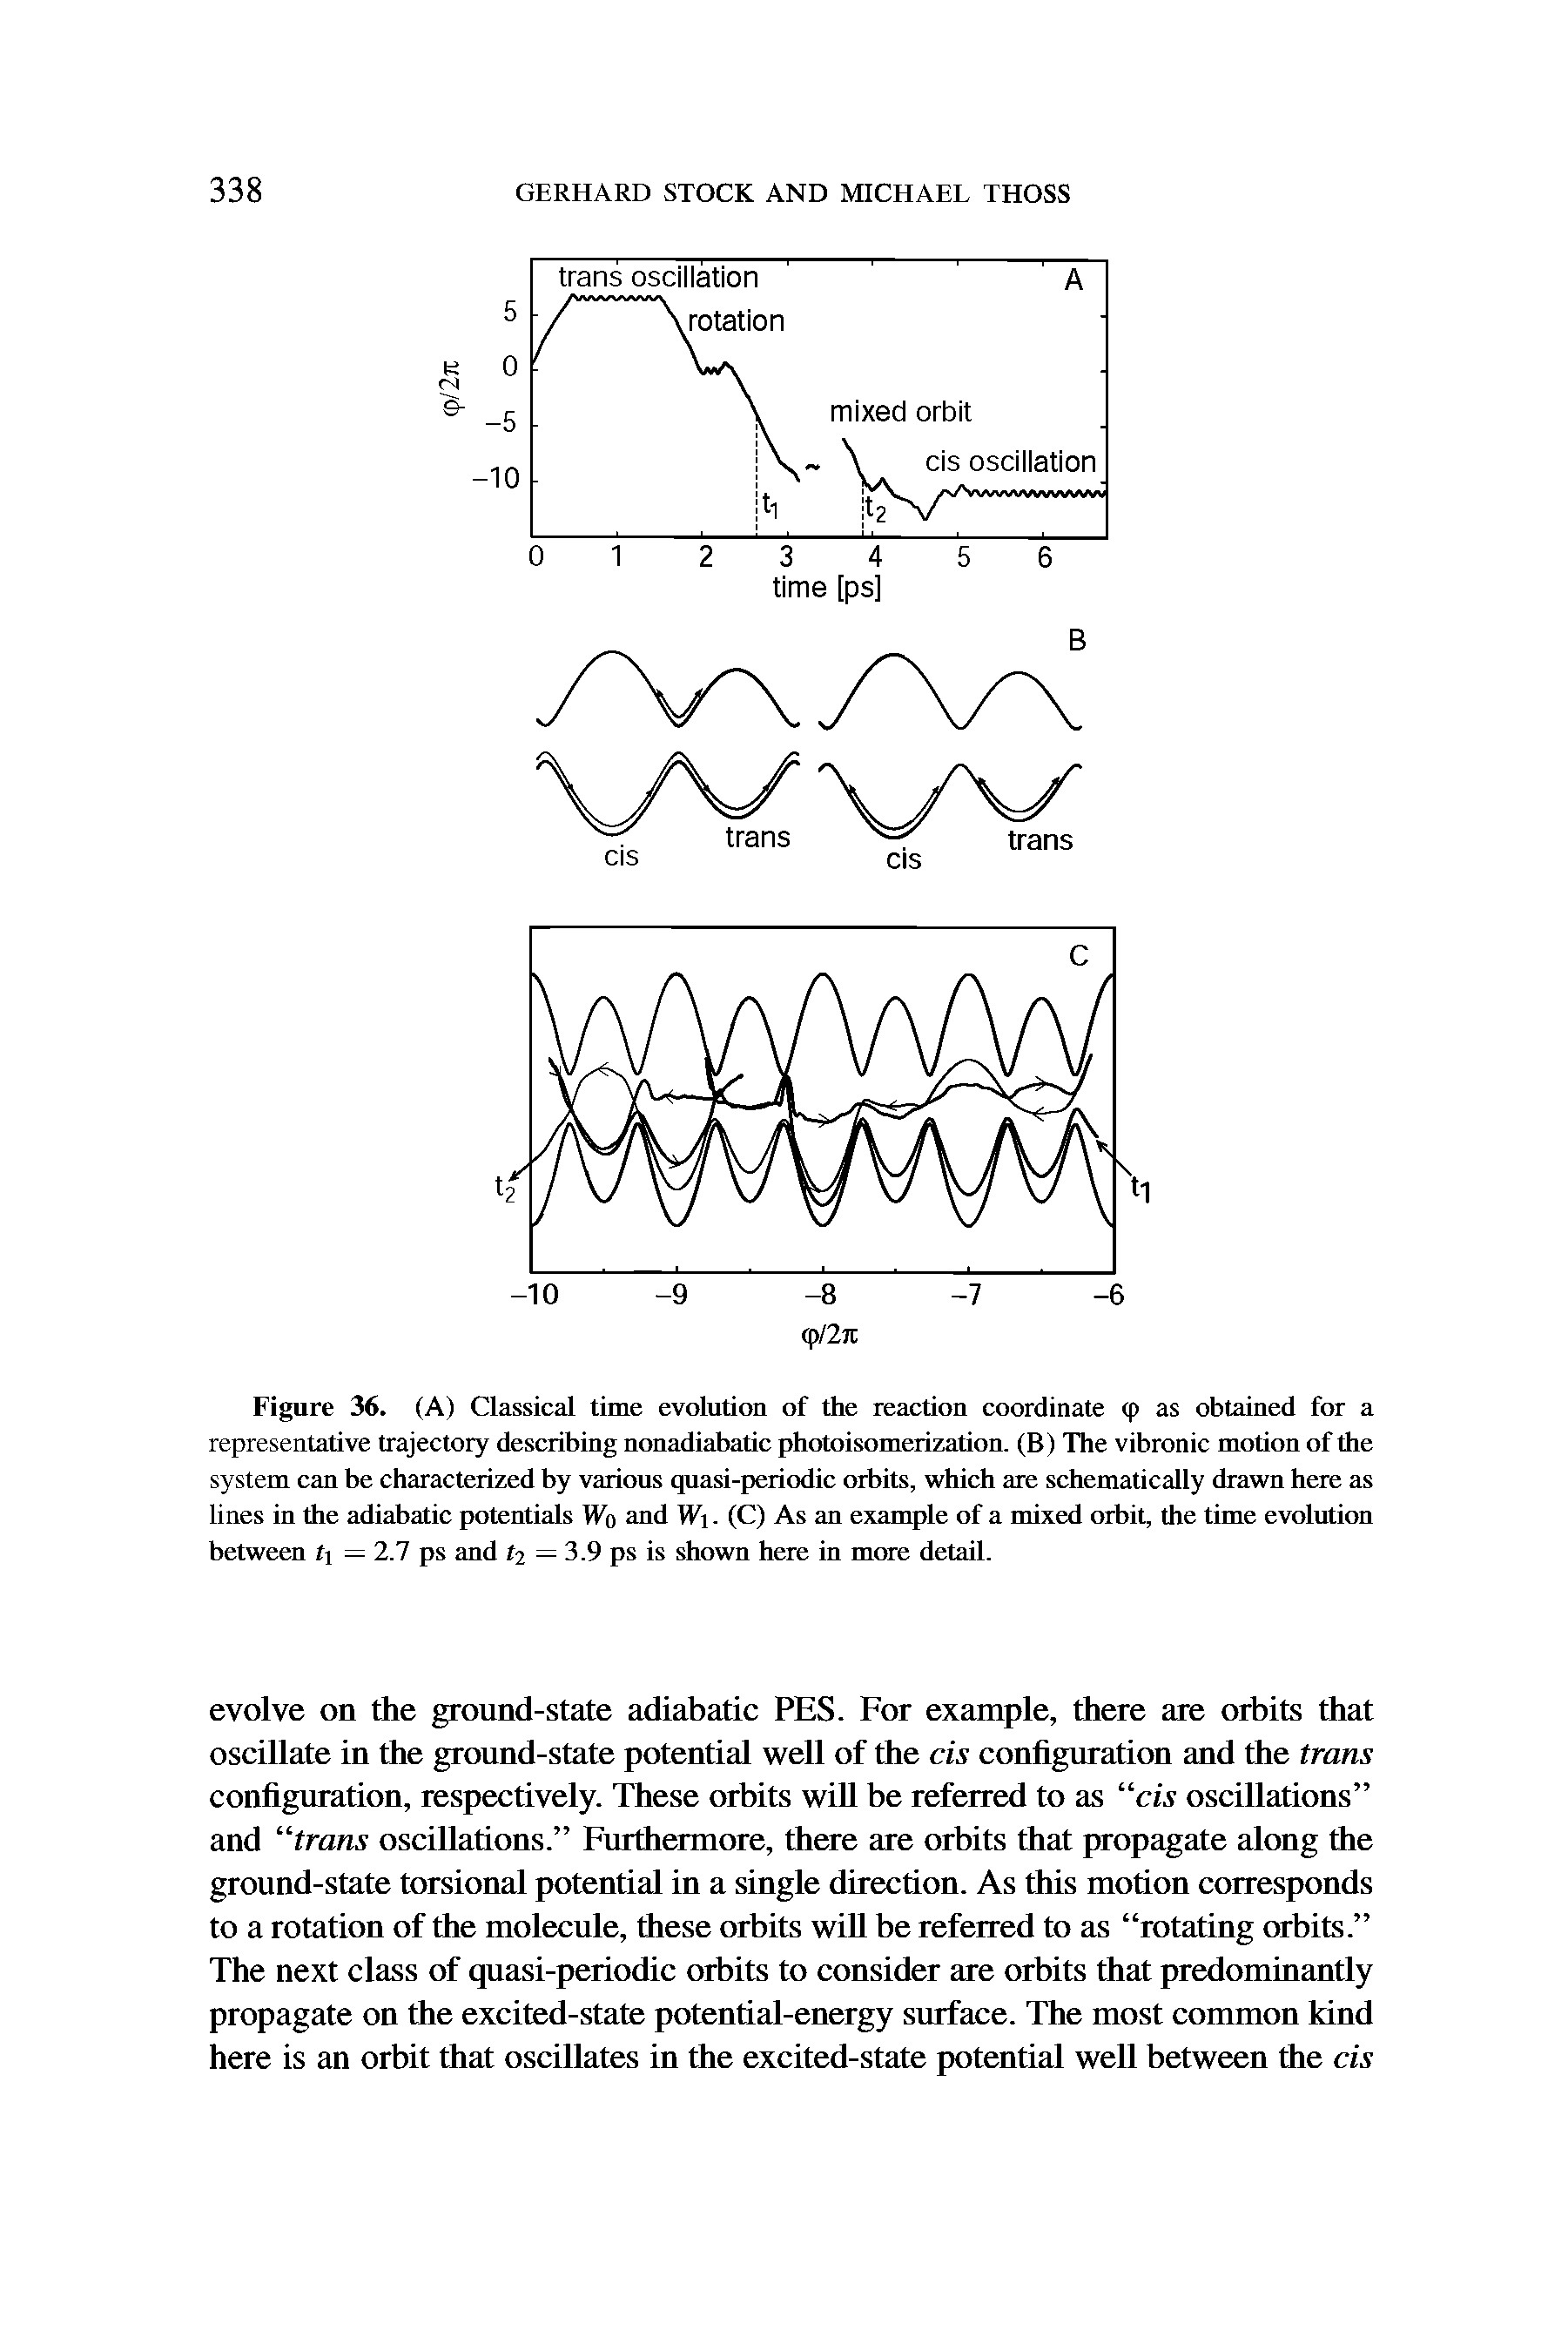 Figure 36, (A) Classical time evolution of the reaction coordinate (p as obtained for a representative trajectory describing nonadiabatic photoisomerization. (B) The vibronic motion of the system can be characterized by various quasi-periodic orbits, which are schematically drawn here as lines in the adiabatic potentials Wo and Wi. (C) As an example of a mixed orbit, the time evolution between t — 2.7 ps and t2 =3.9 ps is shown here in more detail.